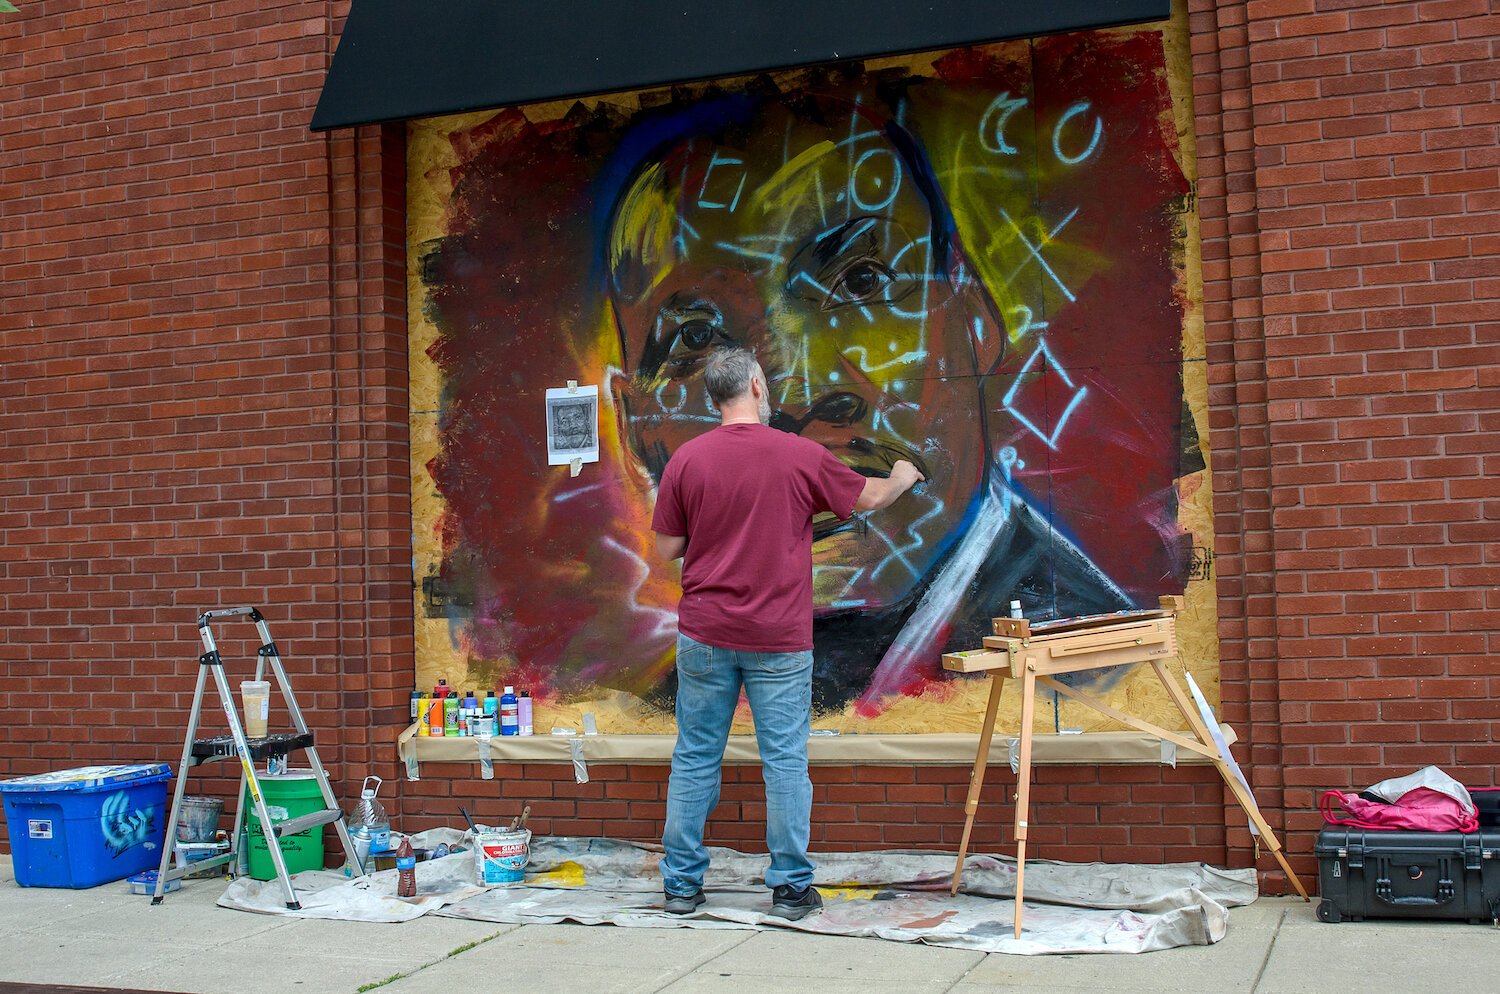 Jeff Pilkinton paints a mural of Mt. Luther King Jr. in downtown Fort Wayne.